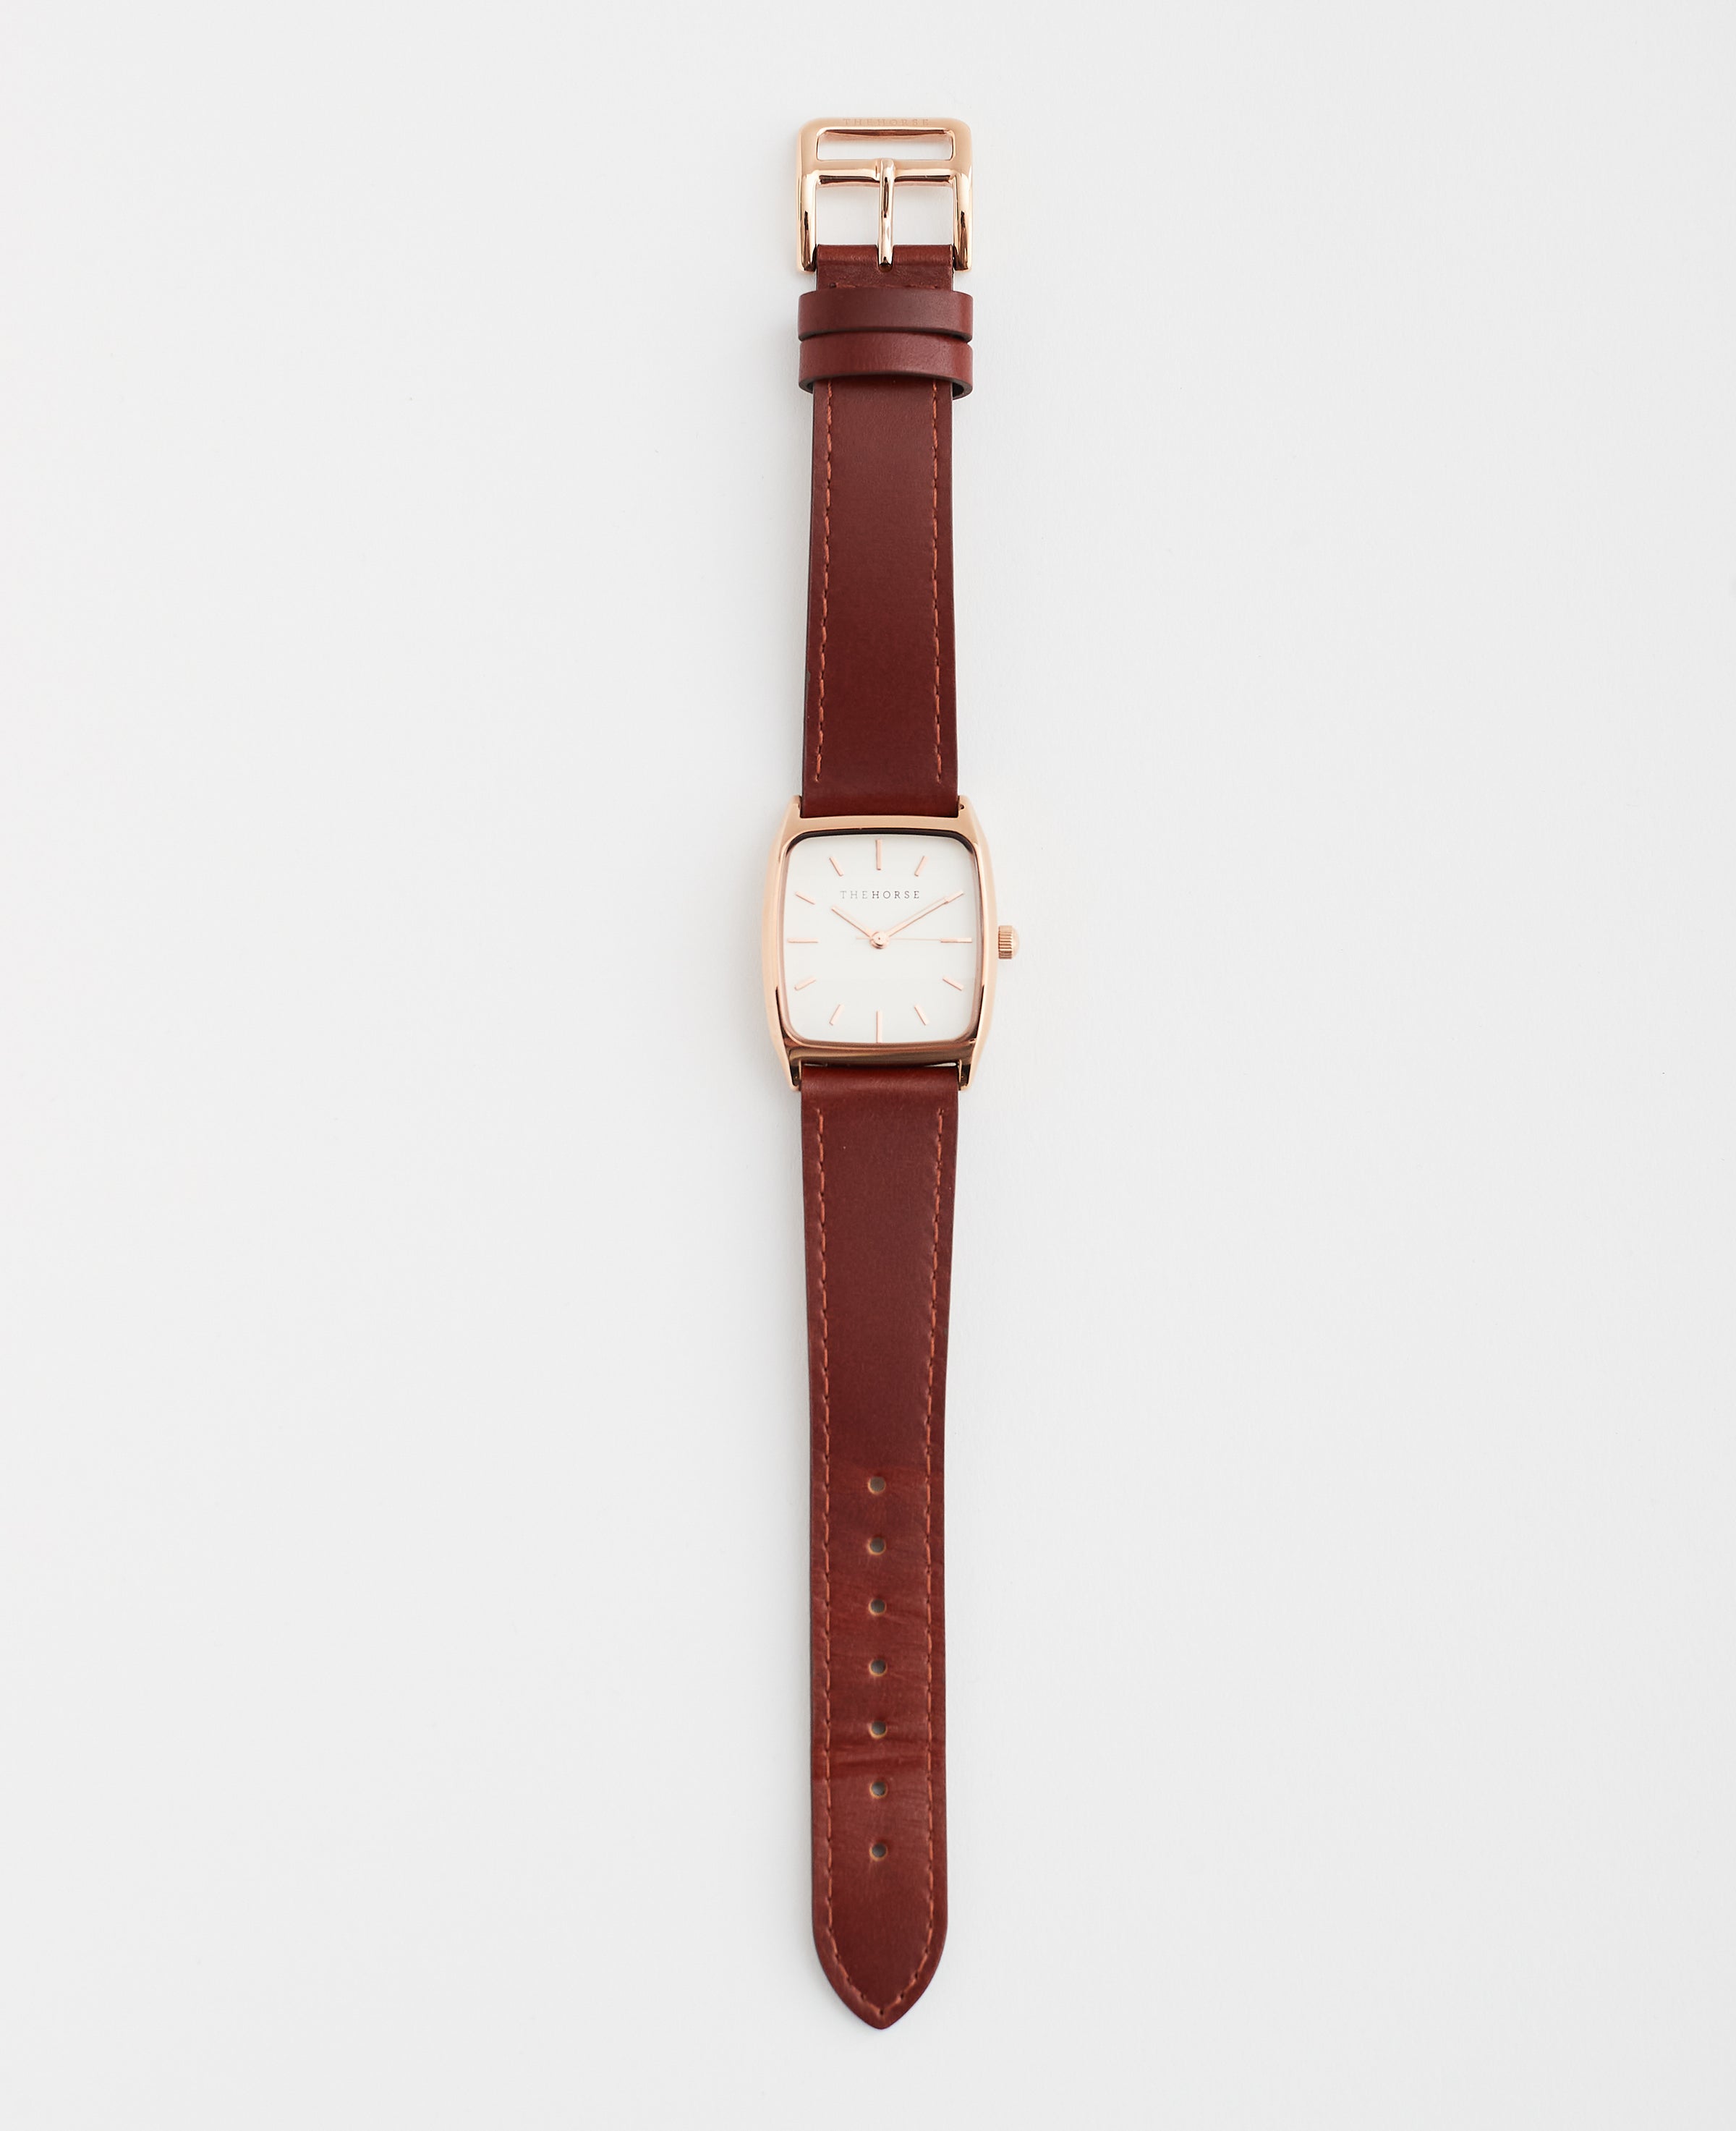 The Dress Watch: Polished Rose Gold Case / White Dial / Walnut Leather Strap by The Horse®